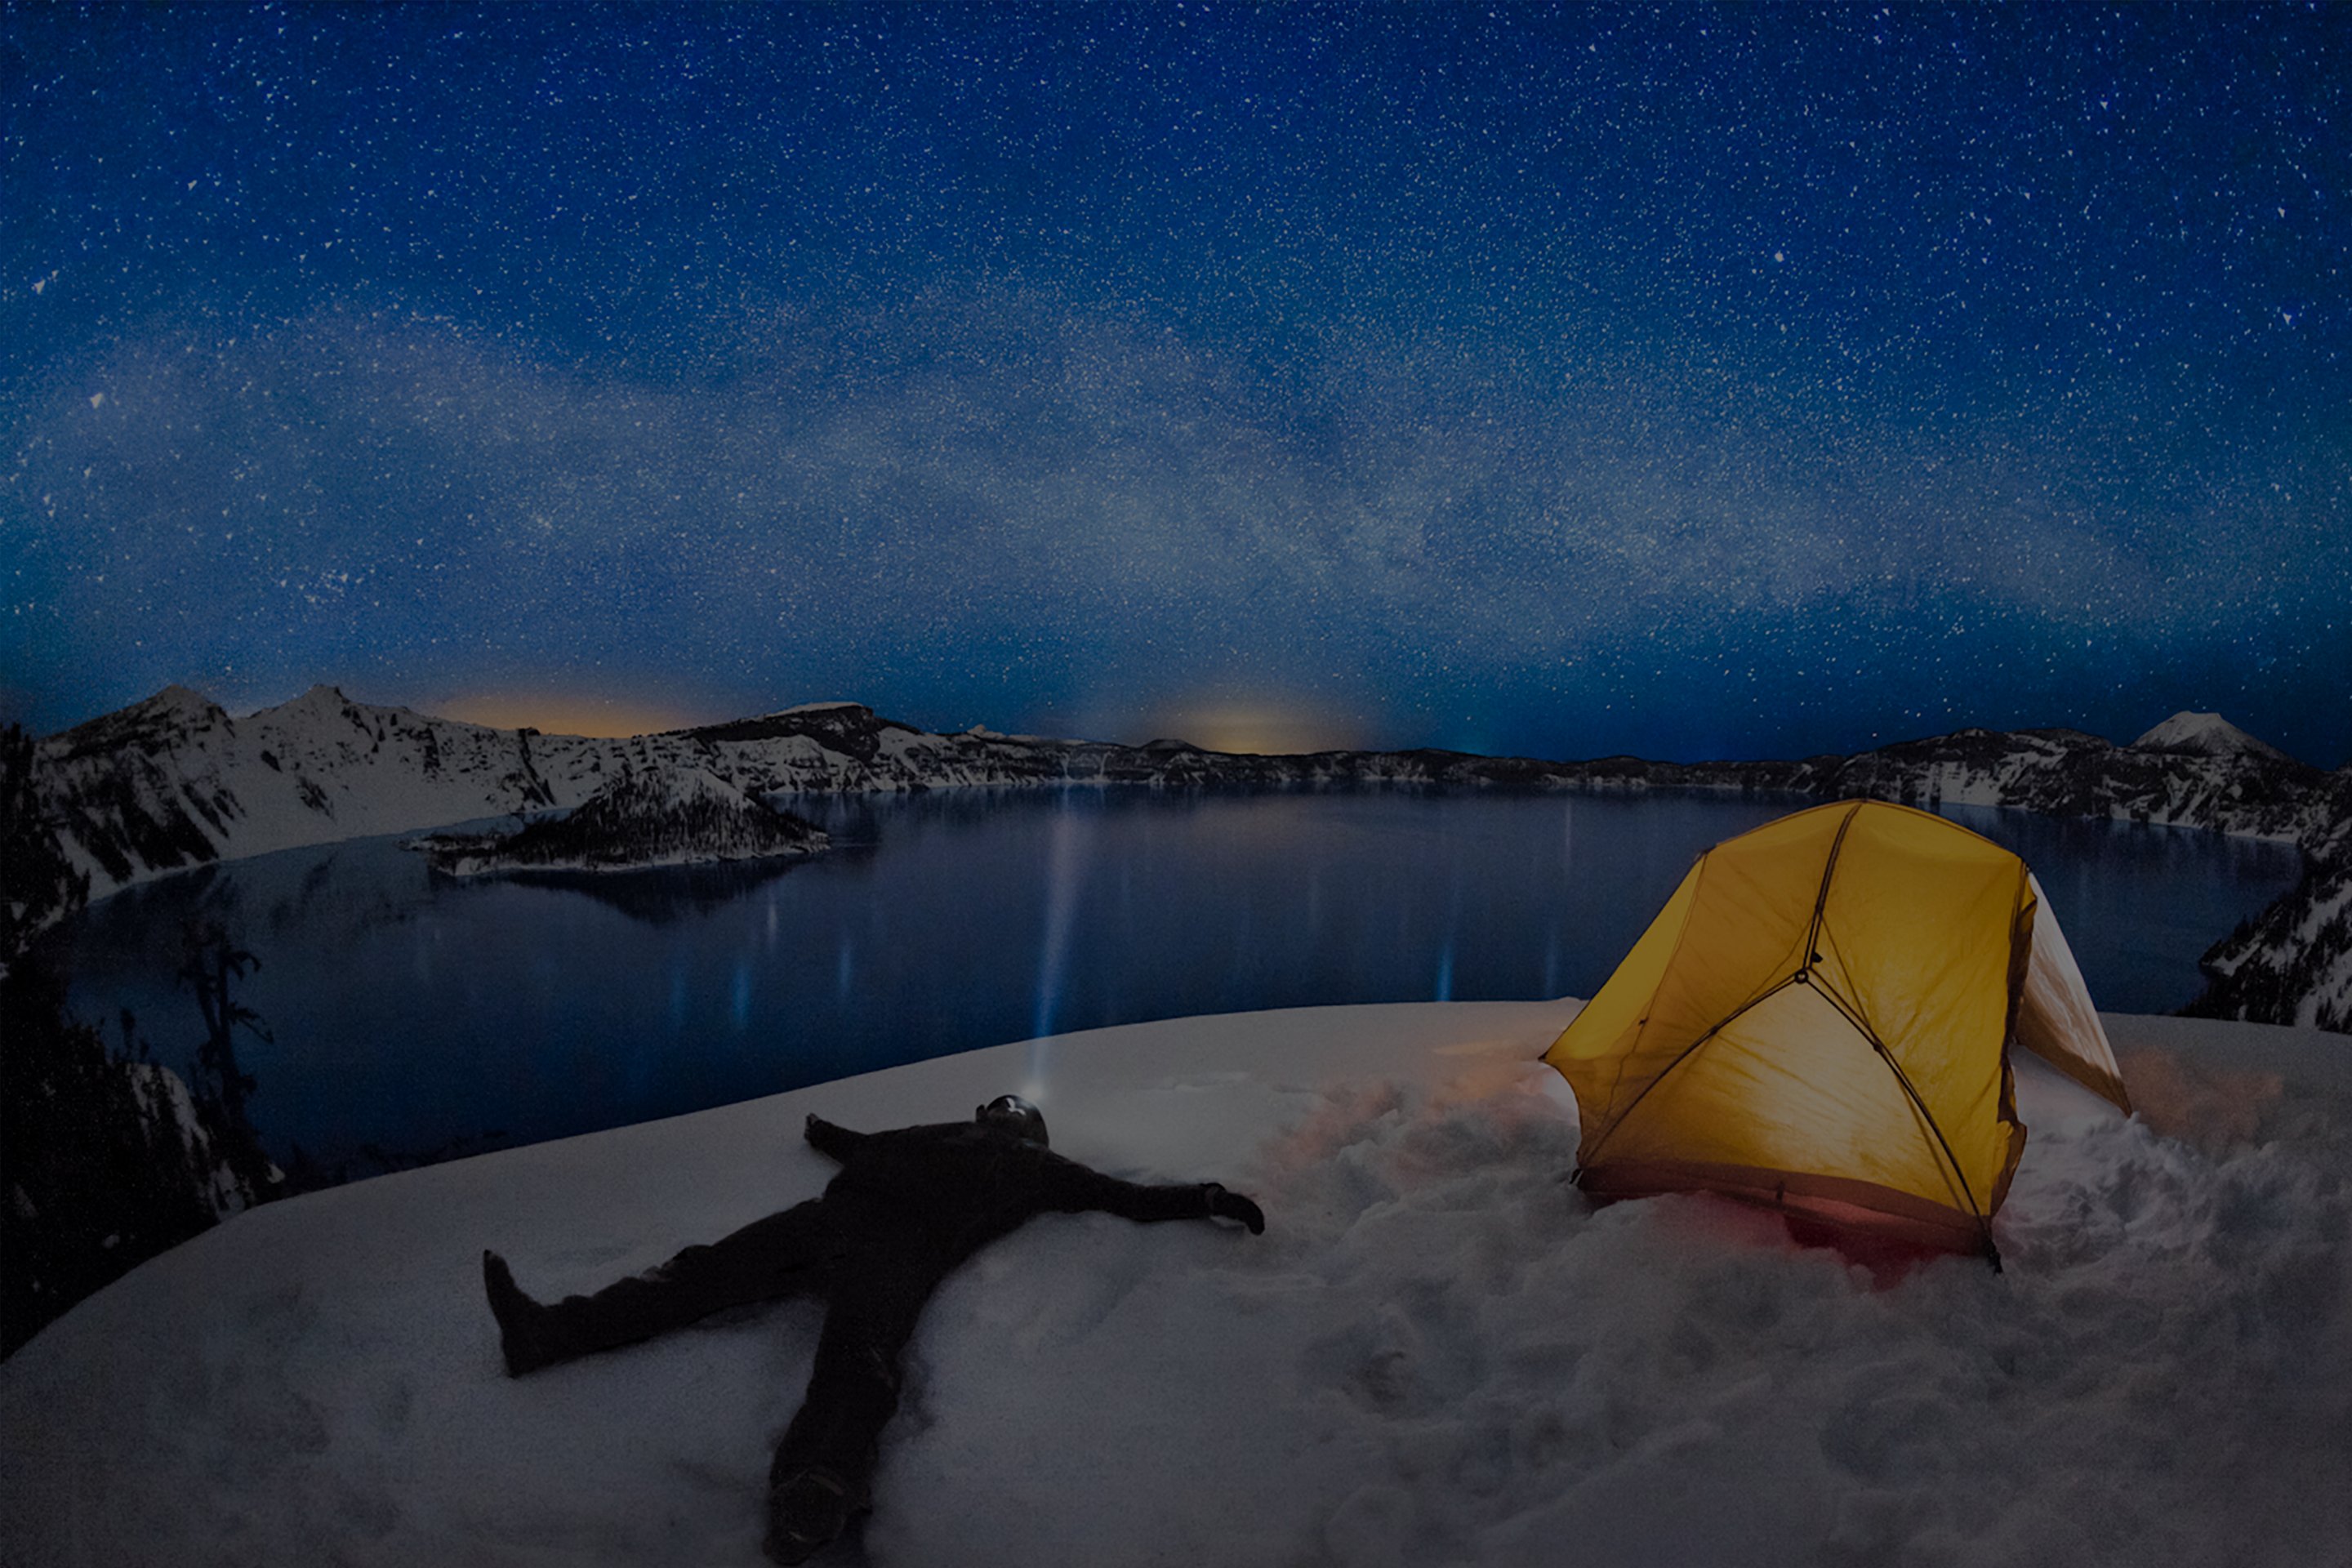 A winter camper gazes at a clear night sky while overlooking Crater Lake.